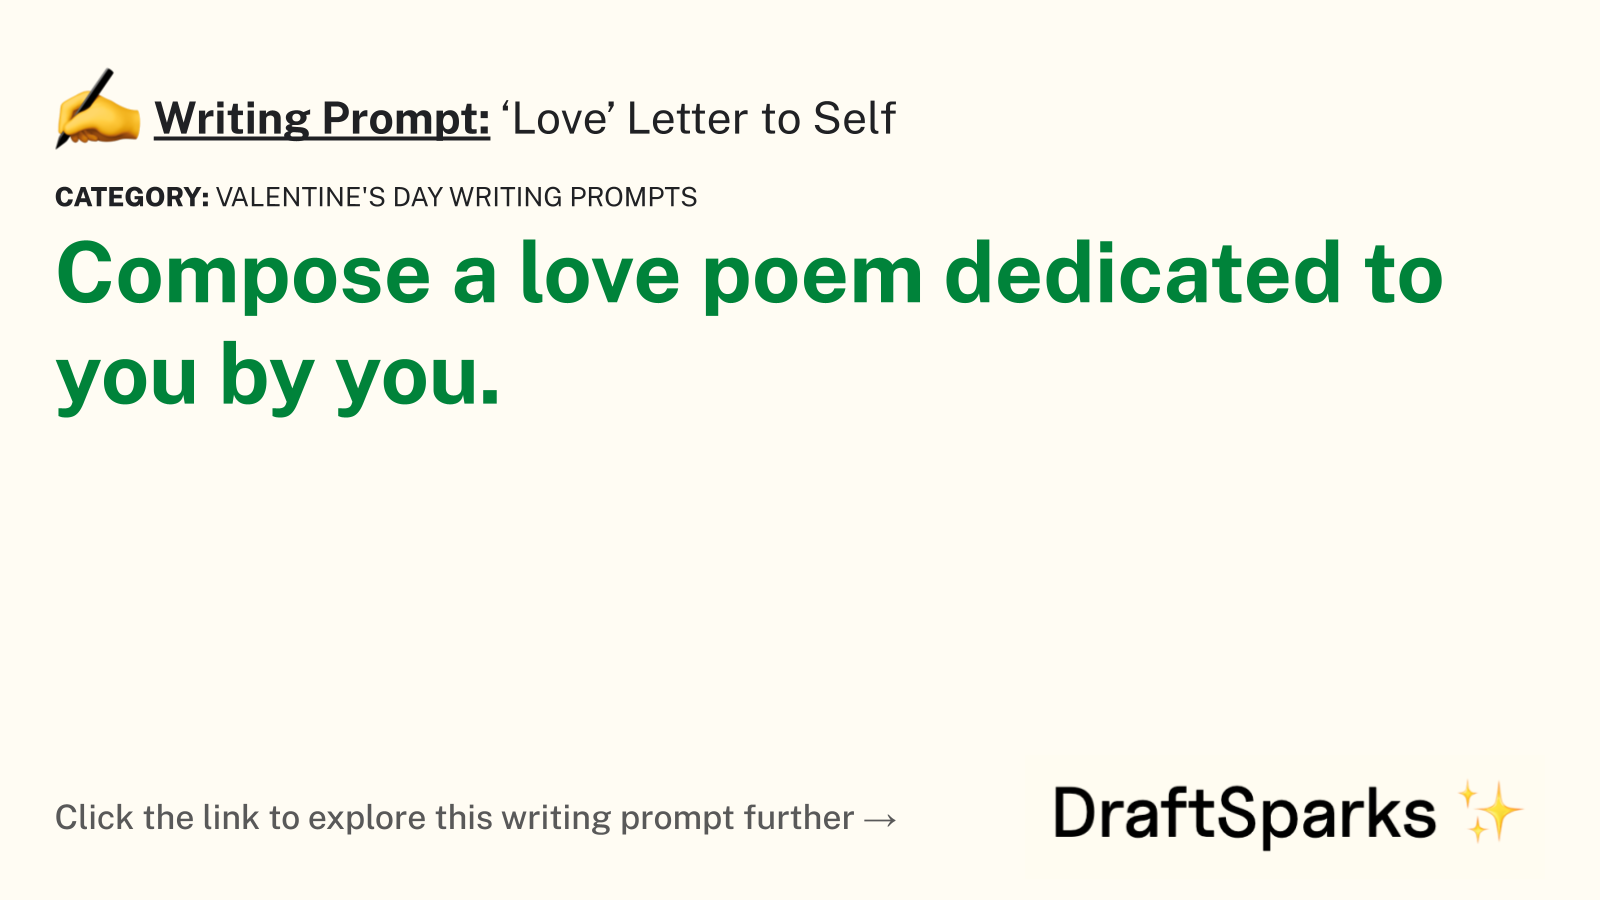 ‘Love’ Letter to Self